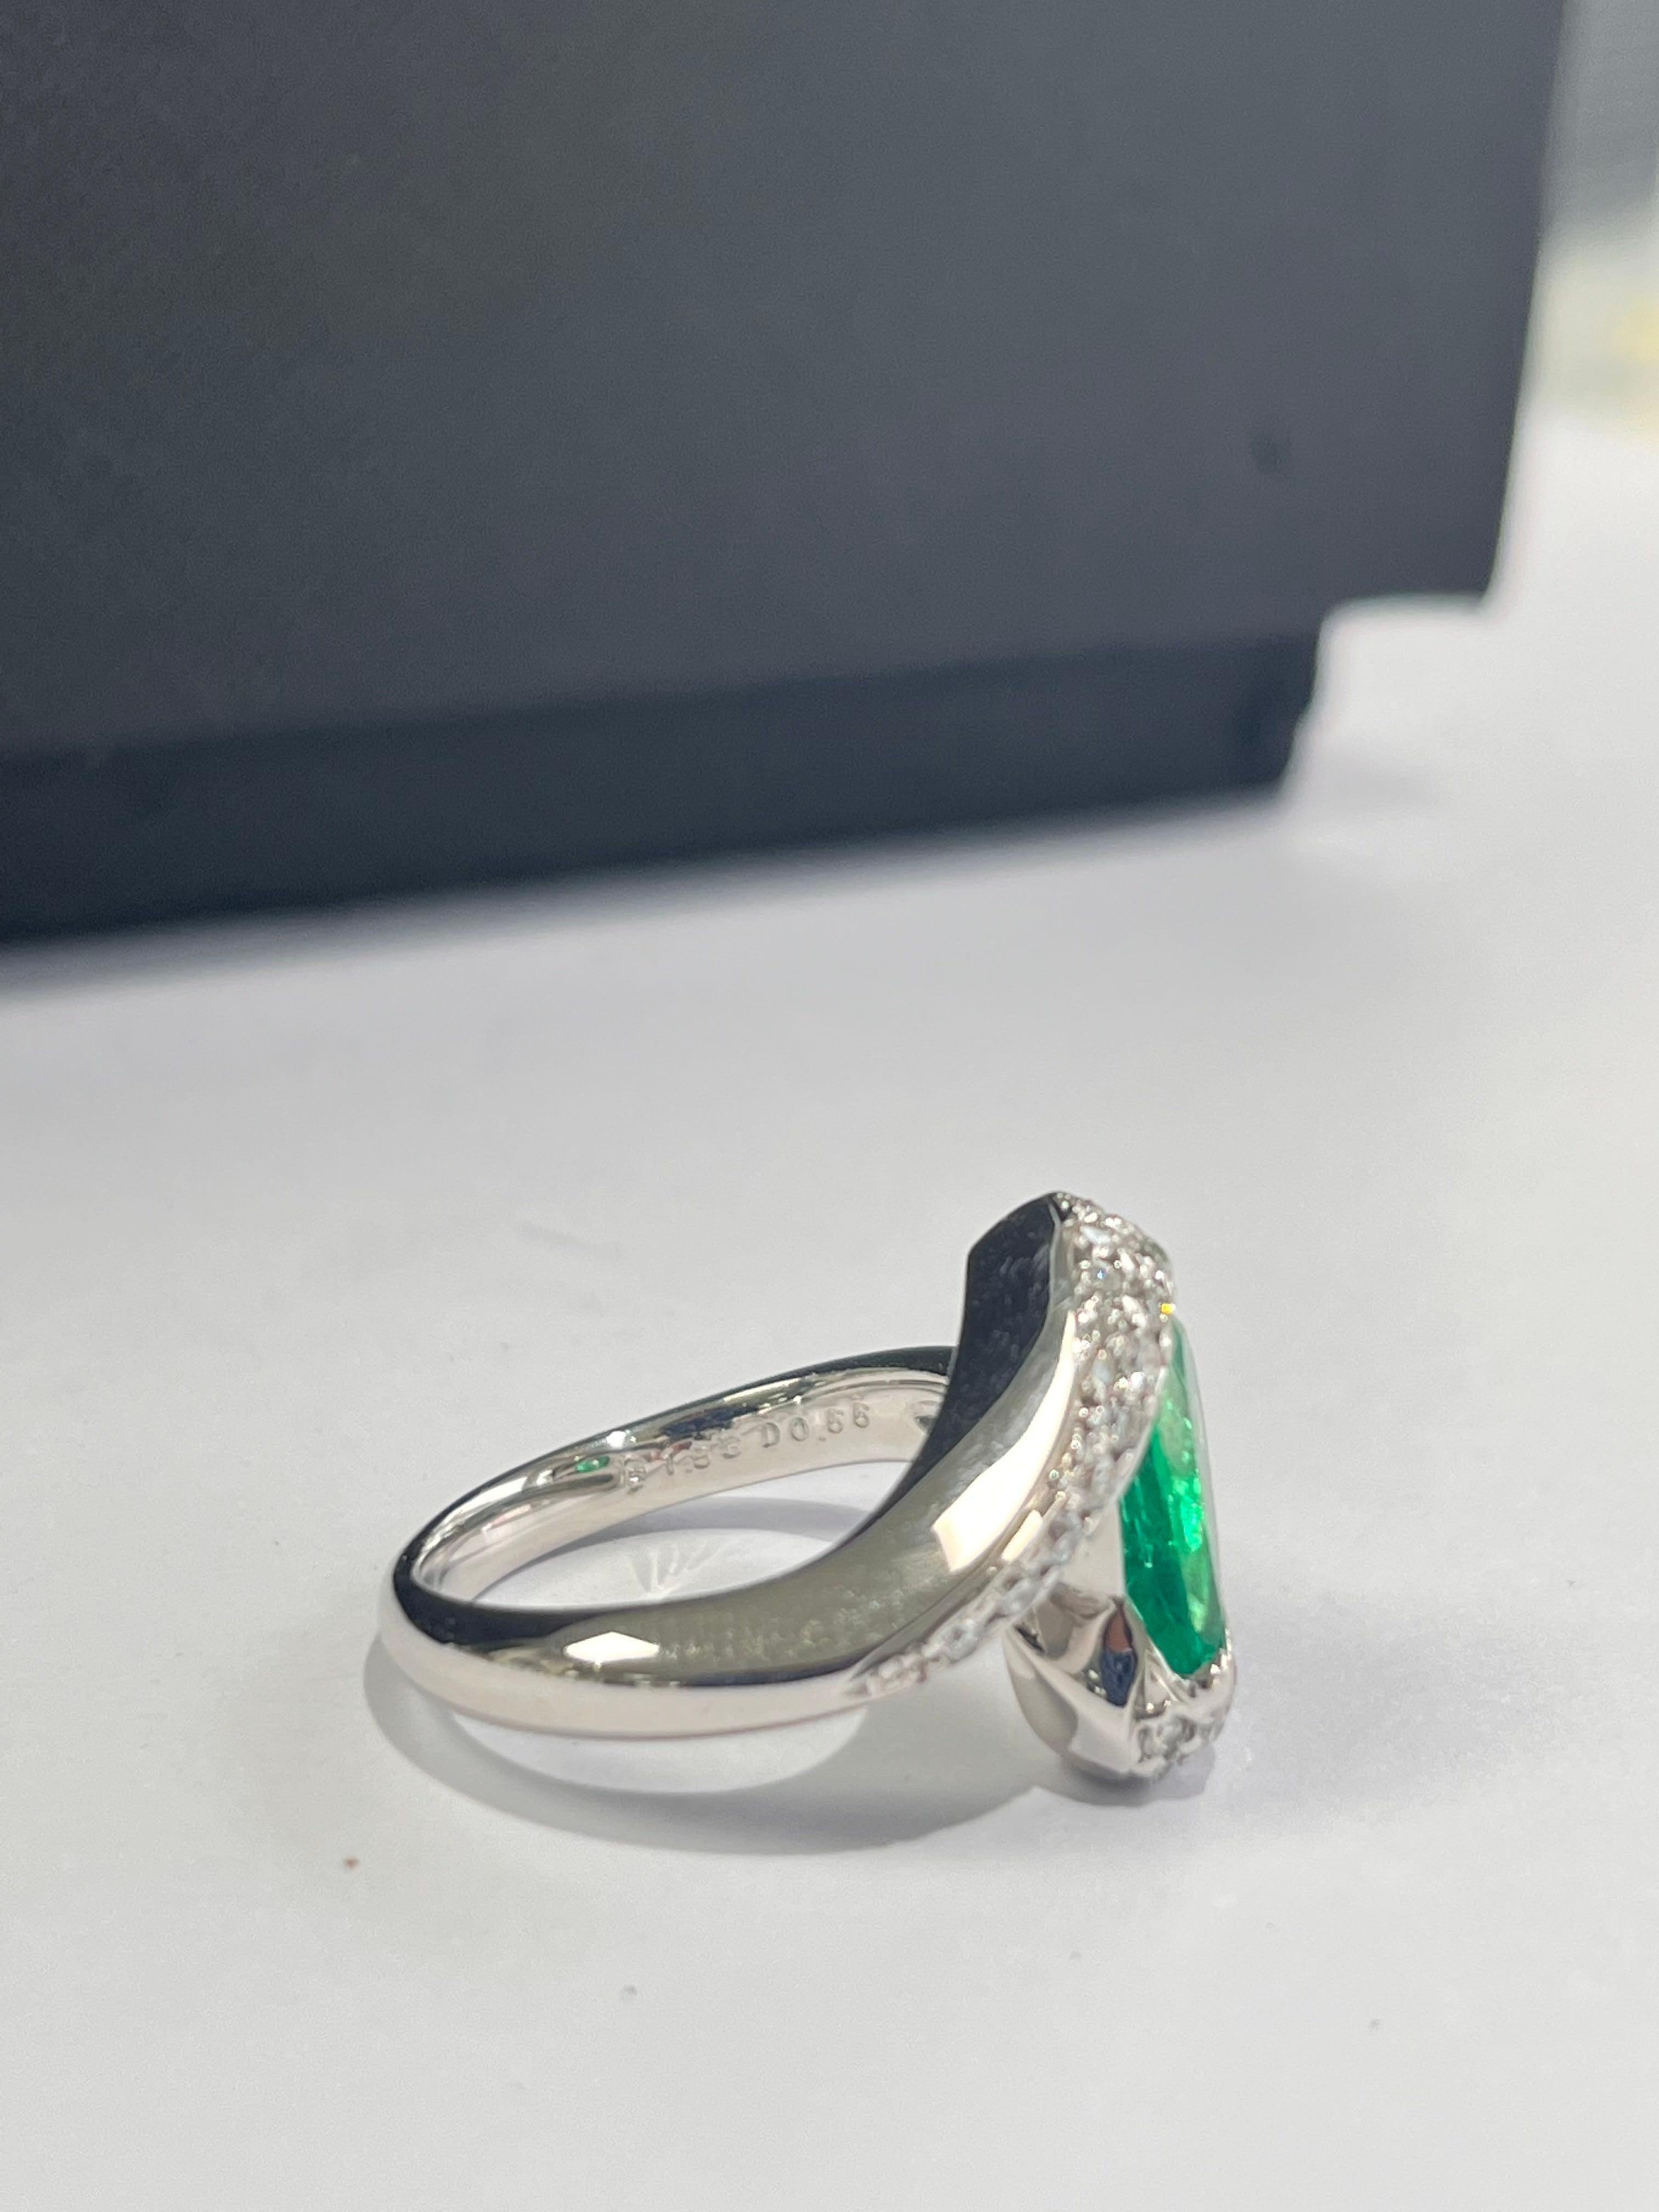 A very beautiful and one of a kind, Columbian Emerald Engagement/ Cocktail Ring set in Platinum 900. The weight of the pear shaped Emerald is 1.53 carats. The Emerald is completely natural, without any treatment & is of Columbian origin. The weight